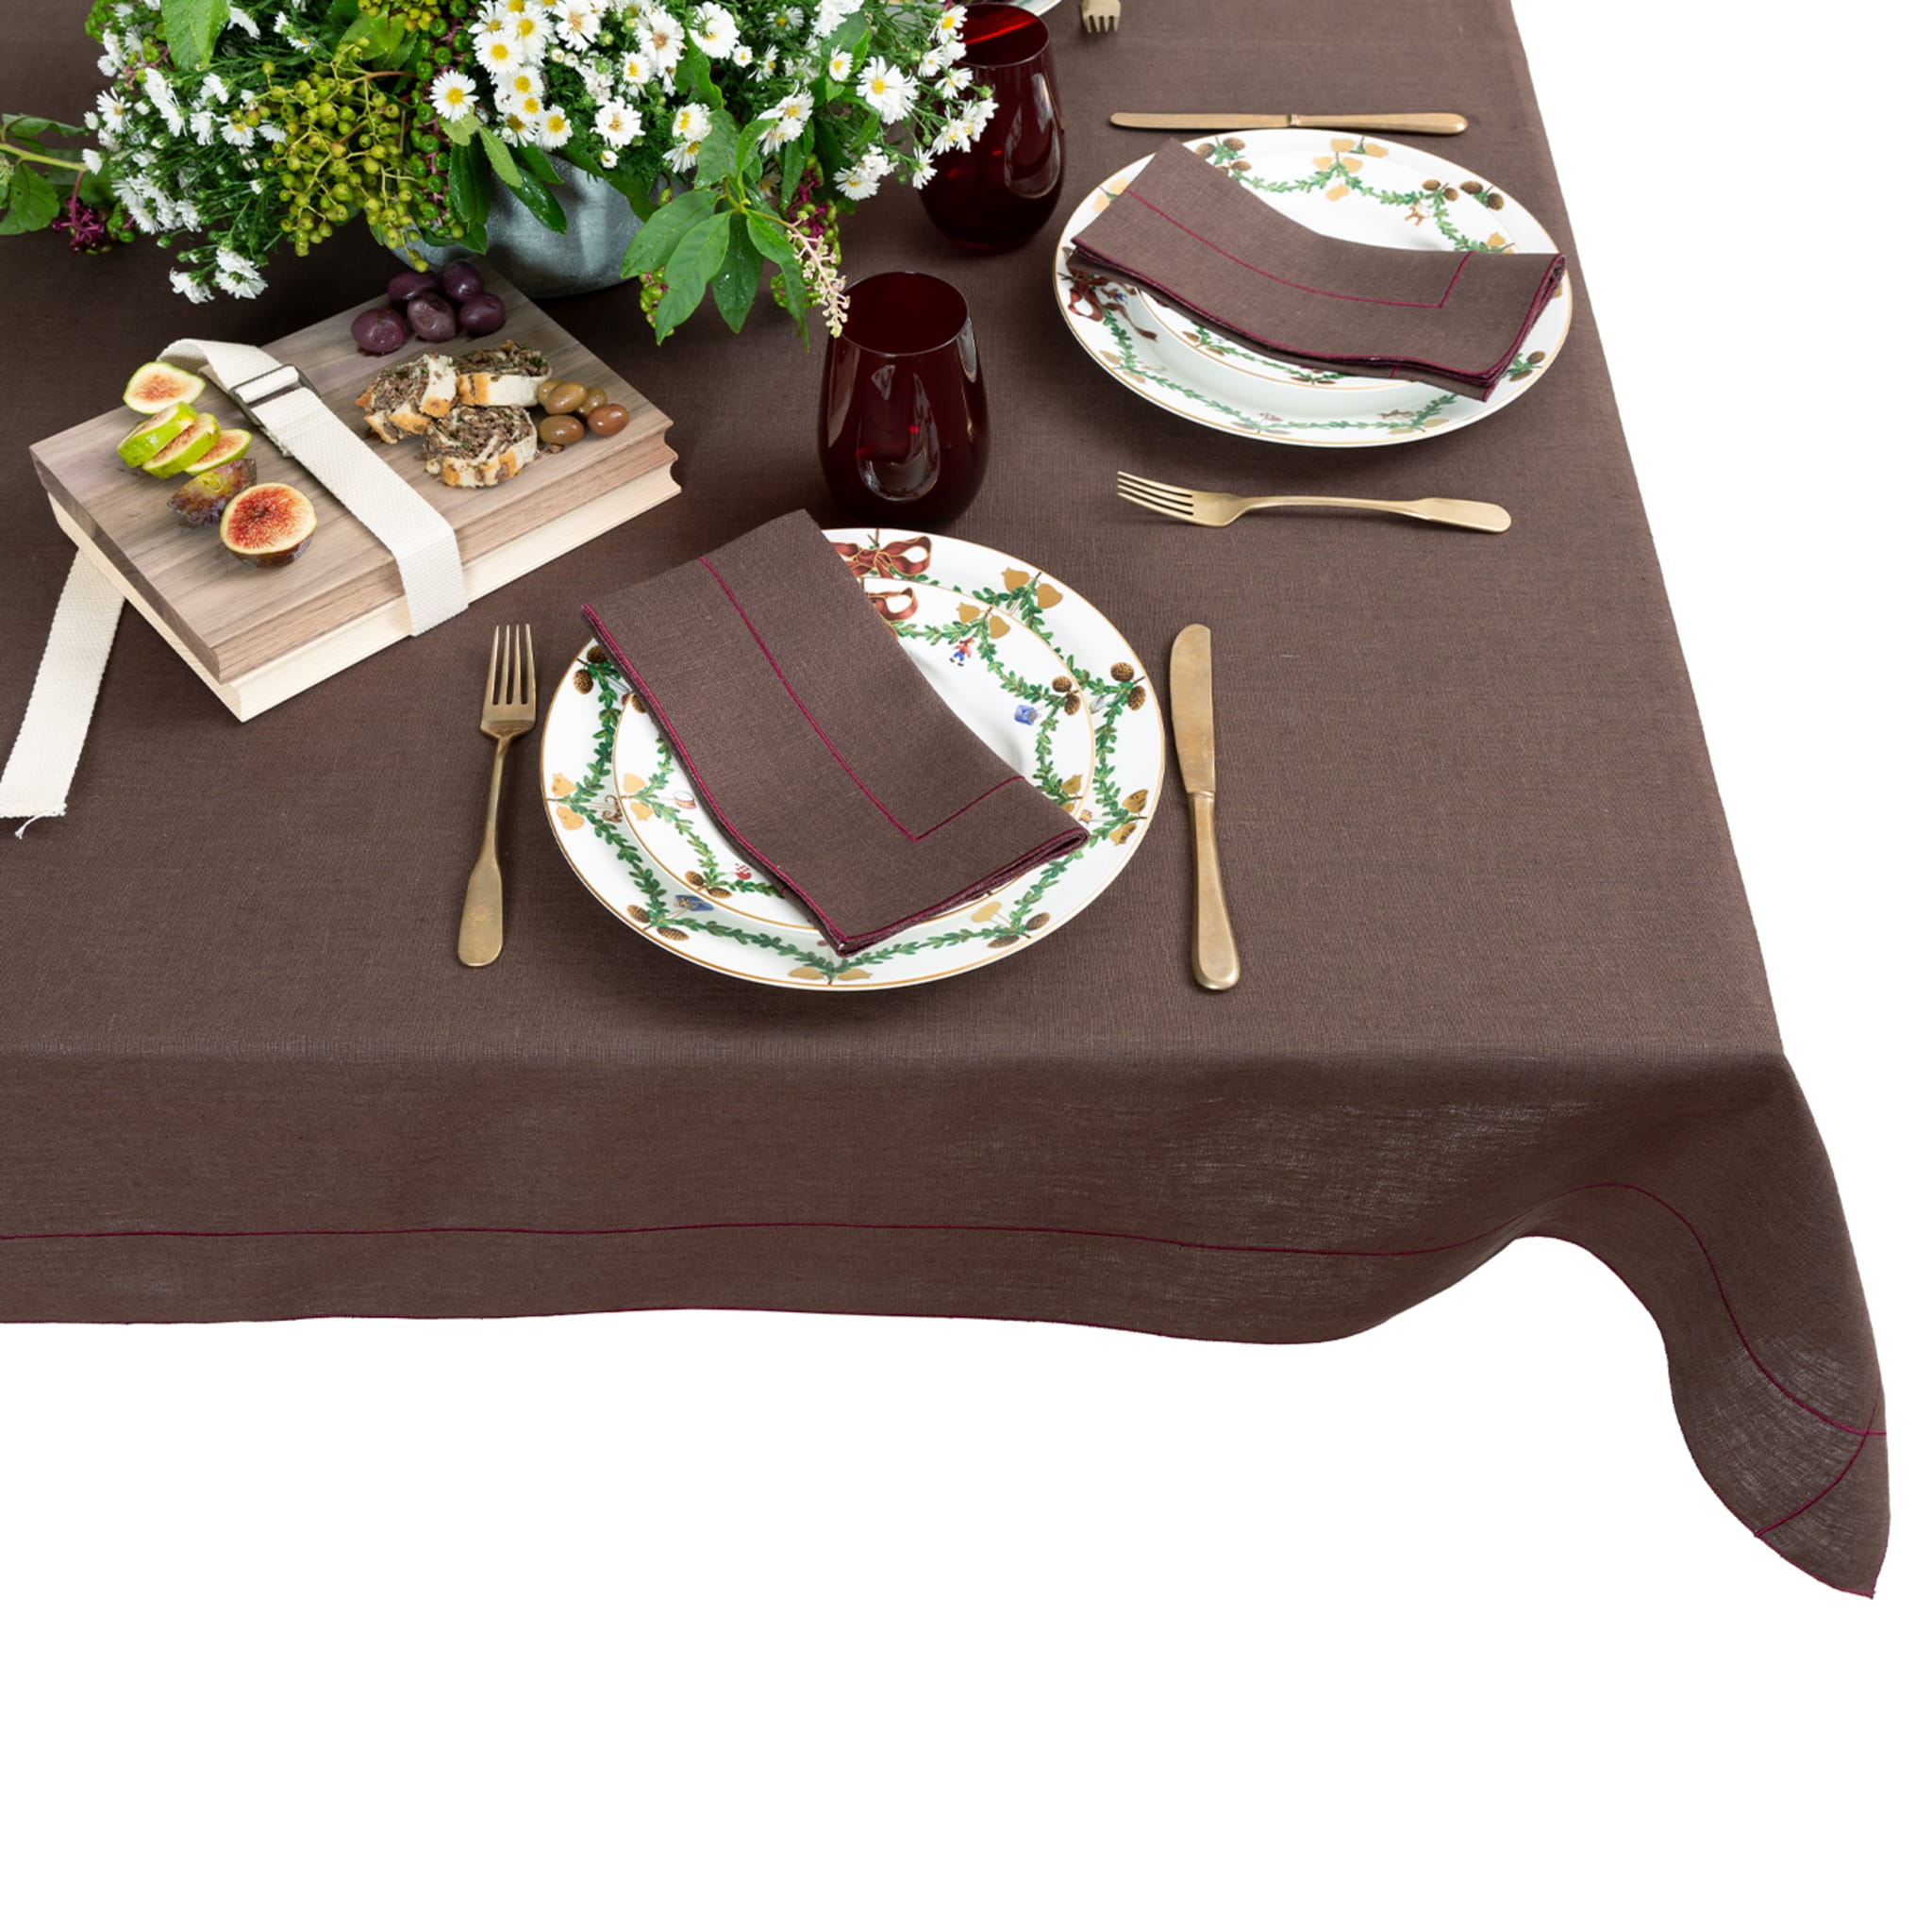 Tulip Frame Set of 1 Tablecloth and 8 Napkins - Alternative view 2